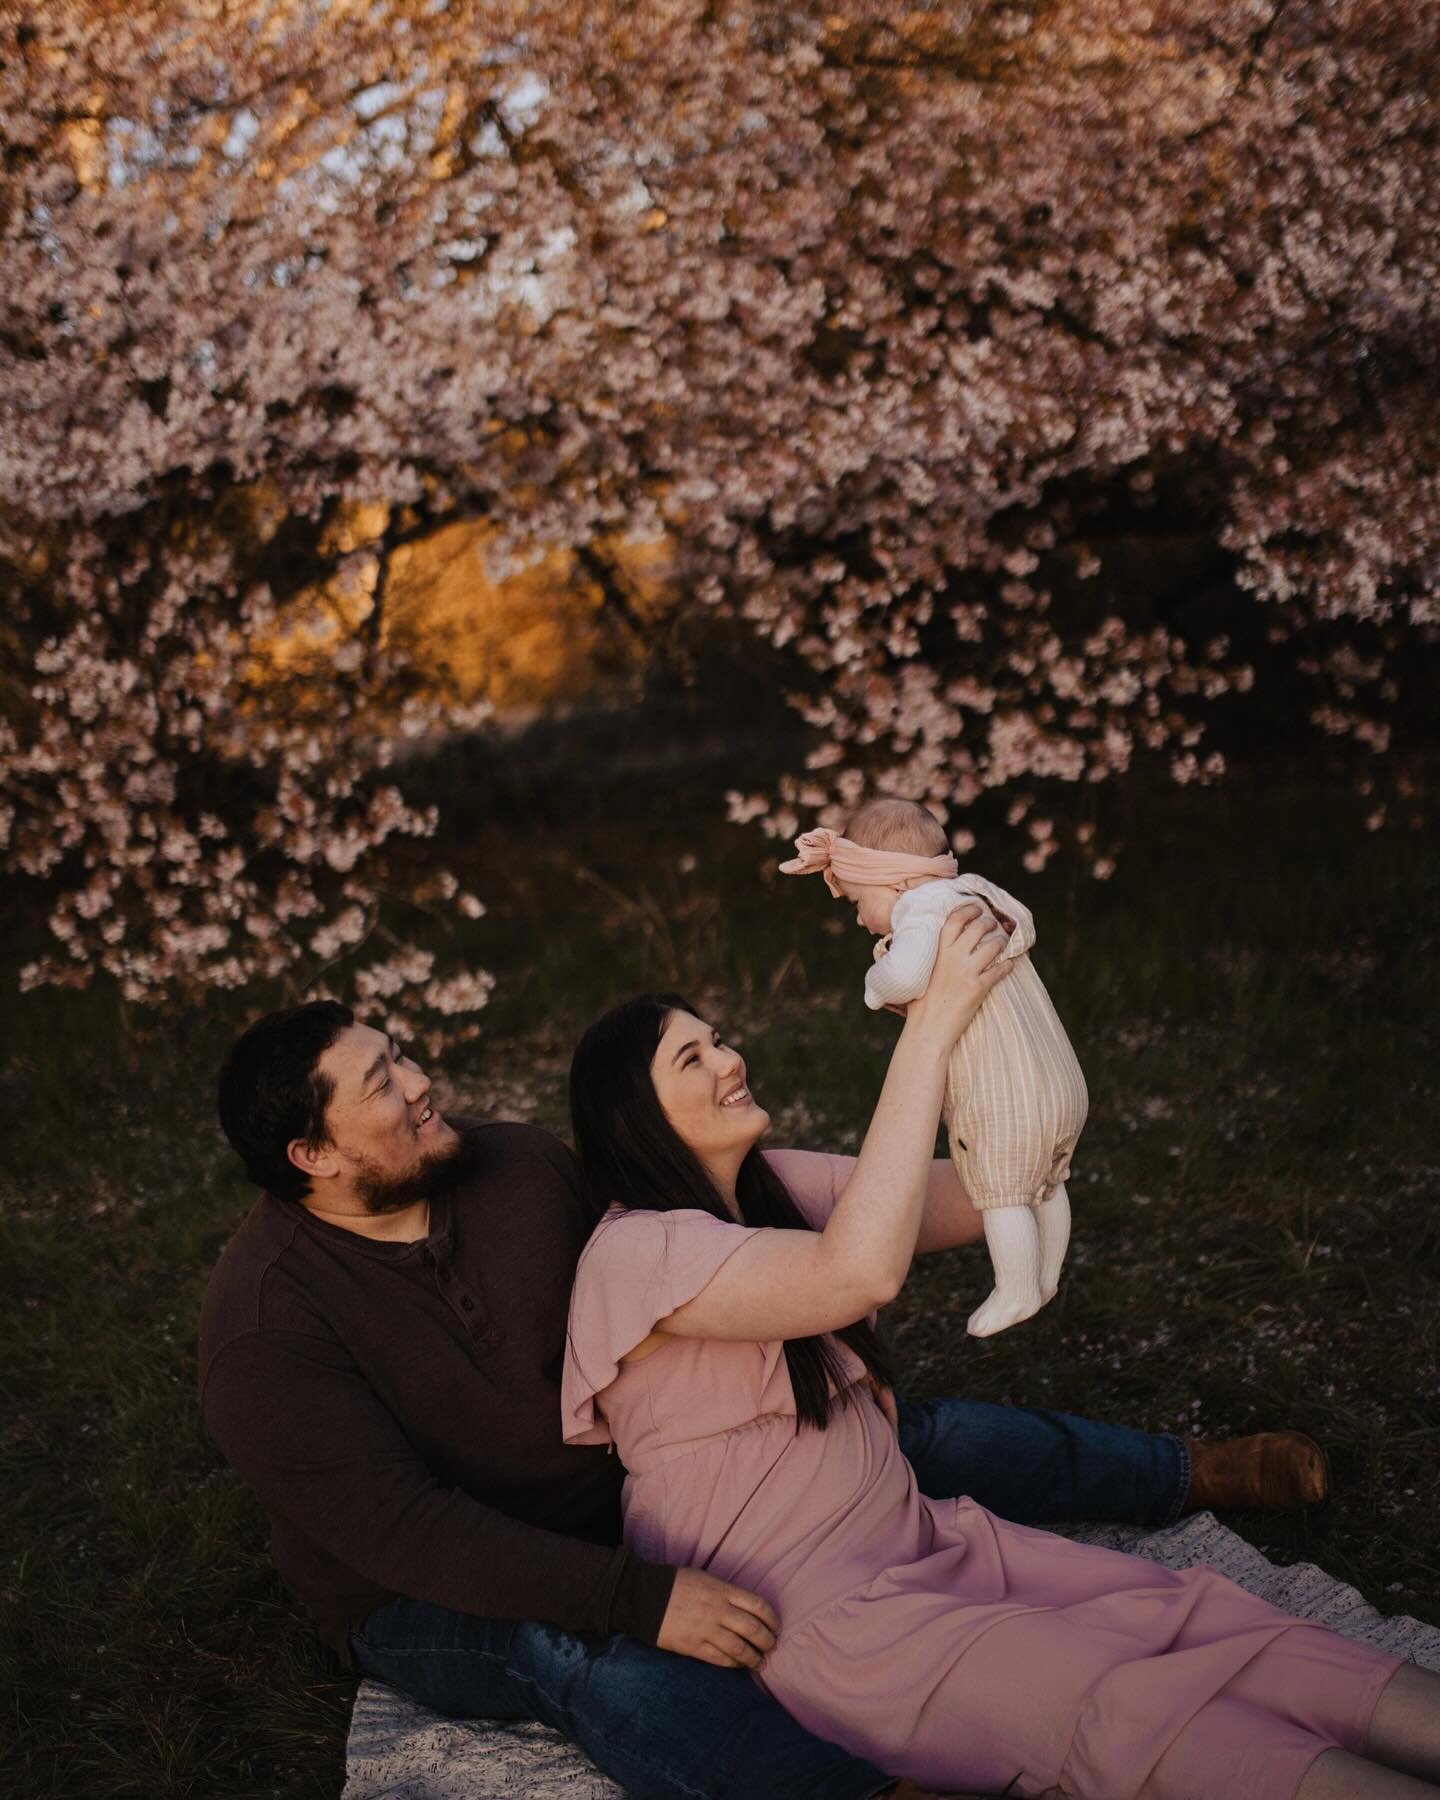 Such a sweet spring session with the Kruse fam! 🌸

#sherwoodoregon #sherwoodphotographer #portlandfamilyphotographer #springflowers #springsession